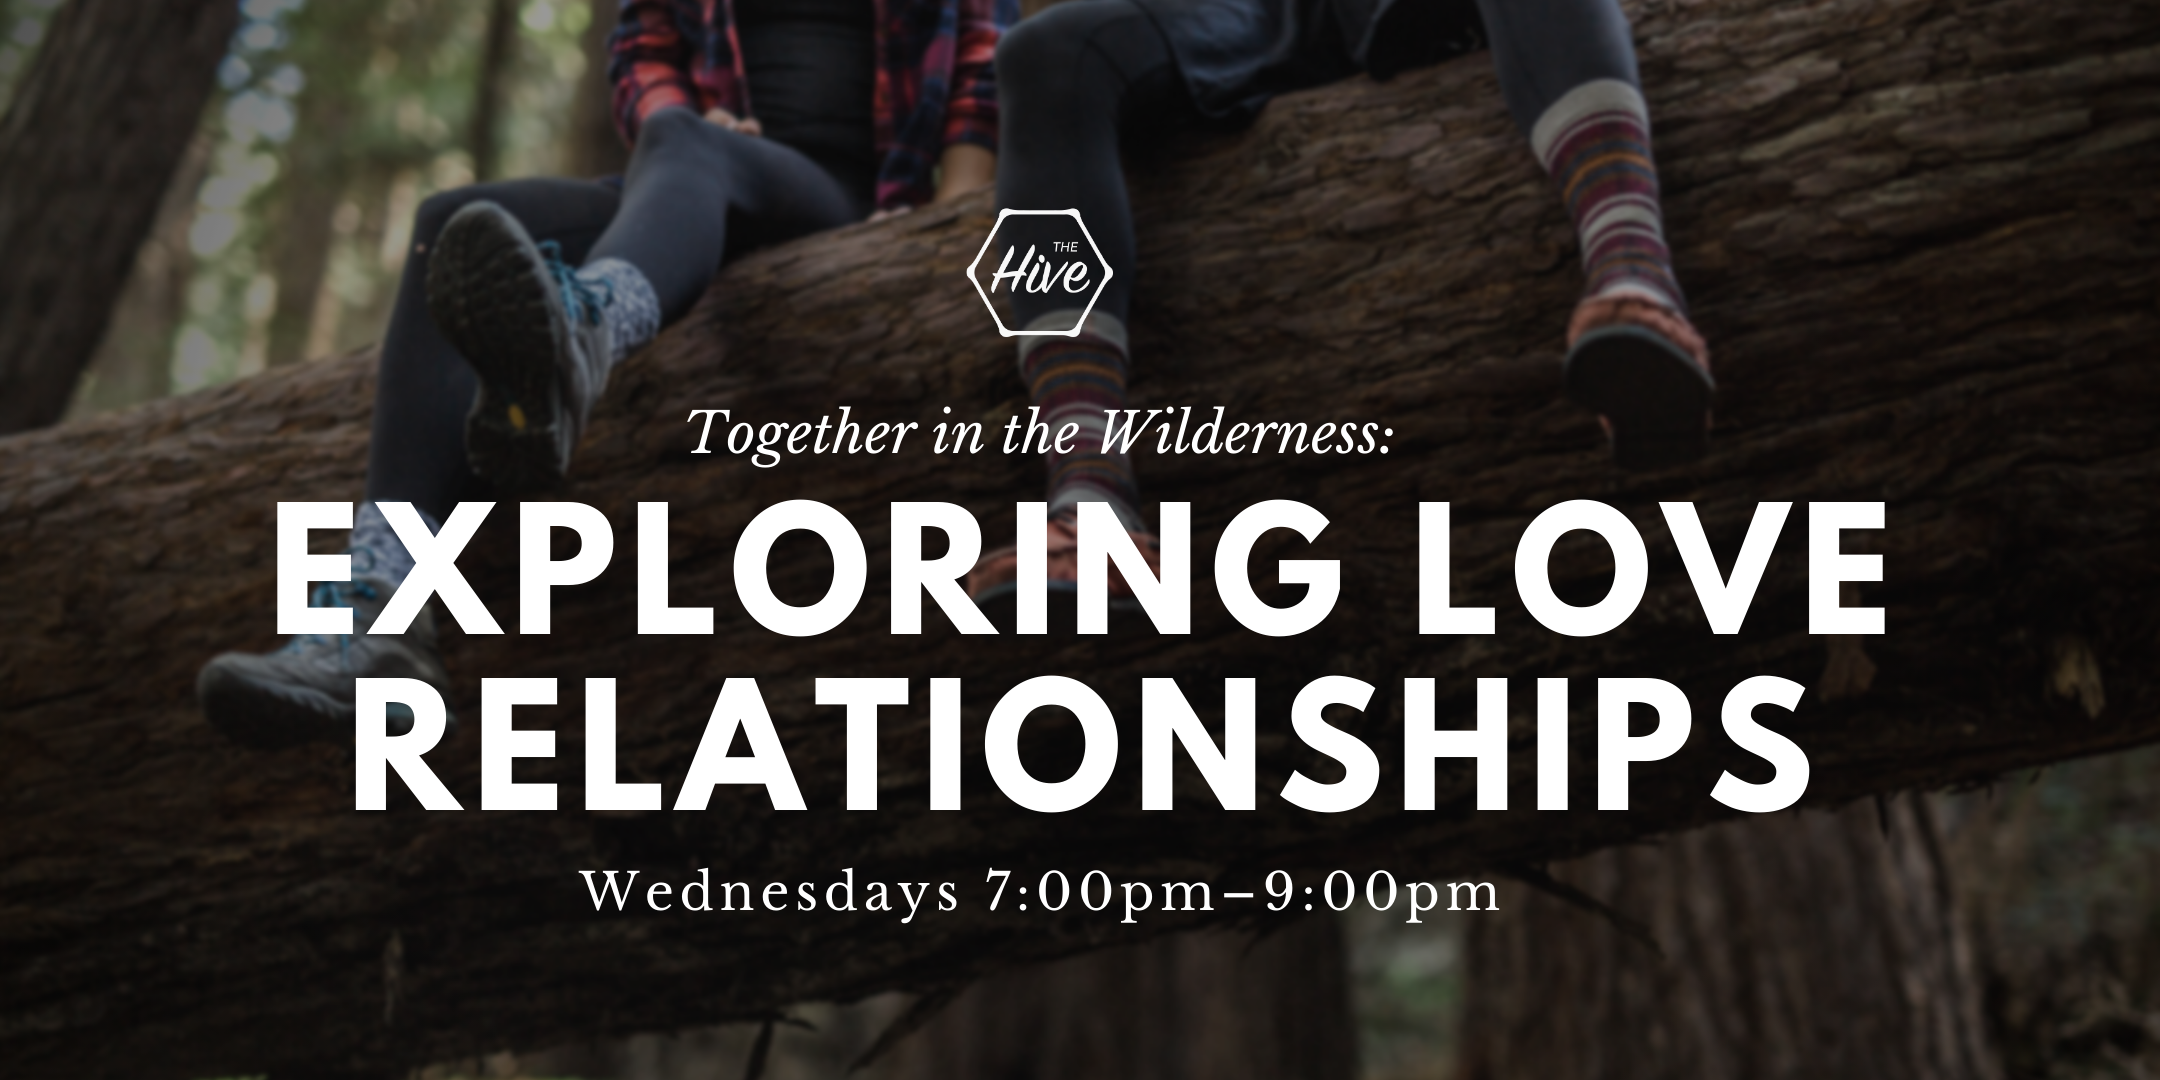 Together in the Wilderness: Exploring Love Relationships